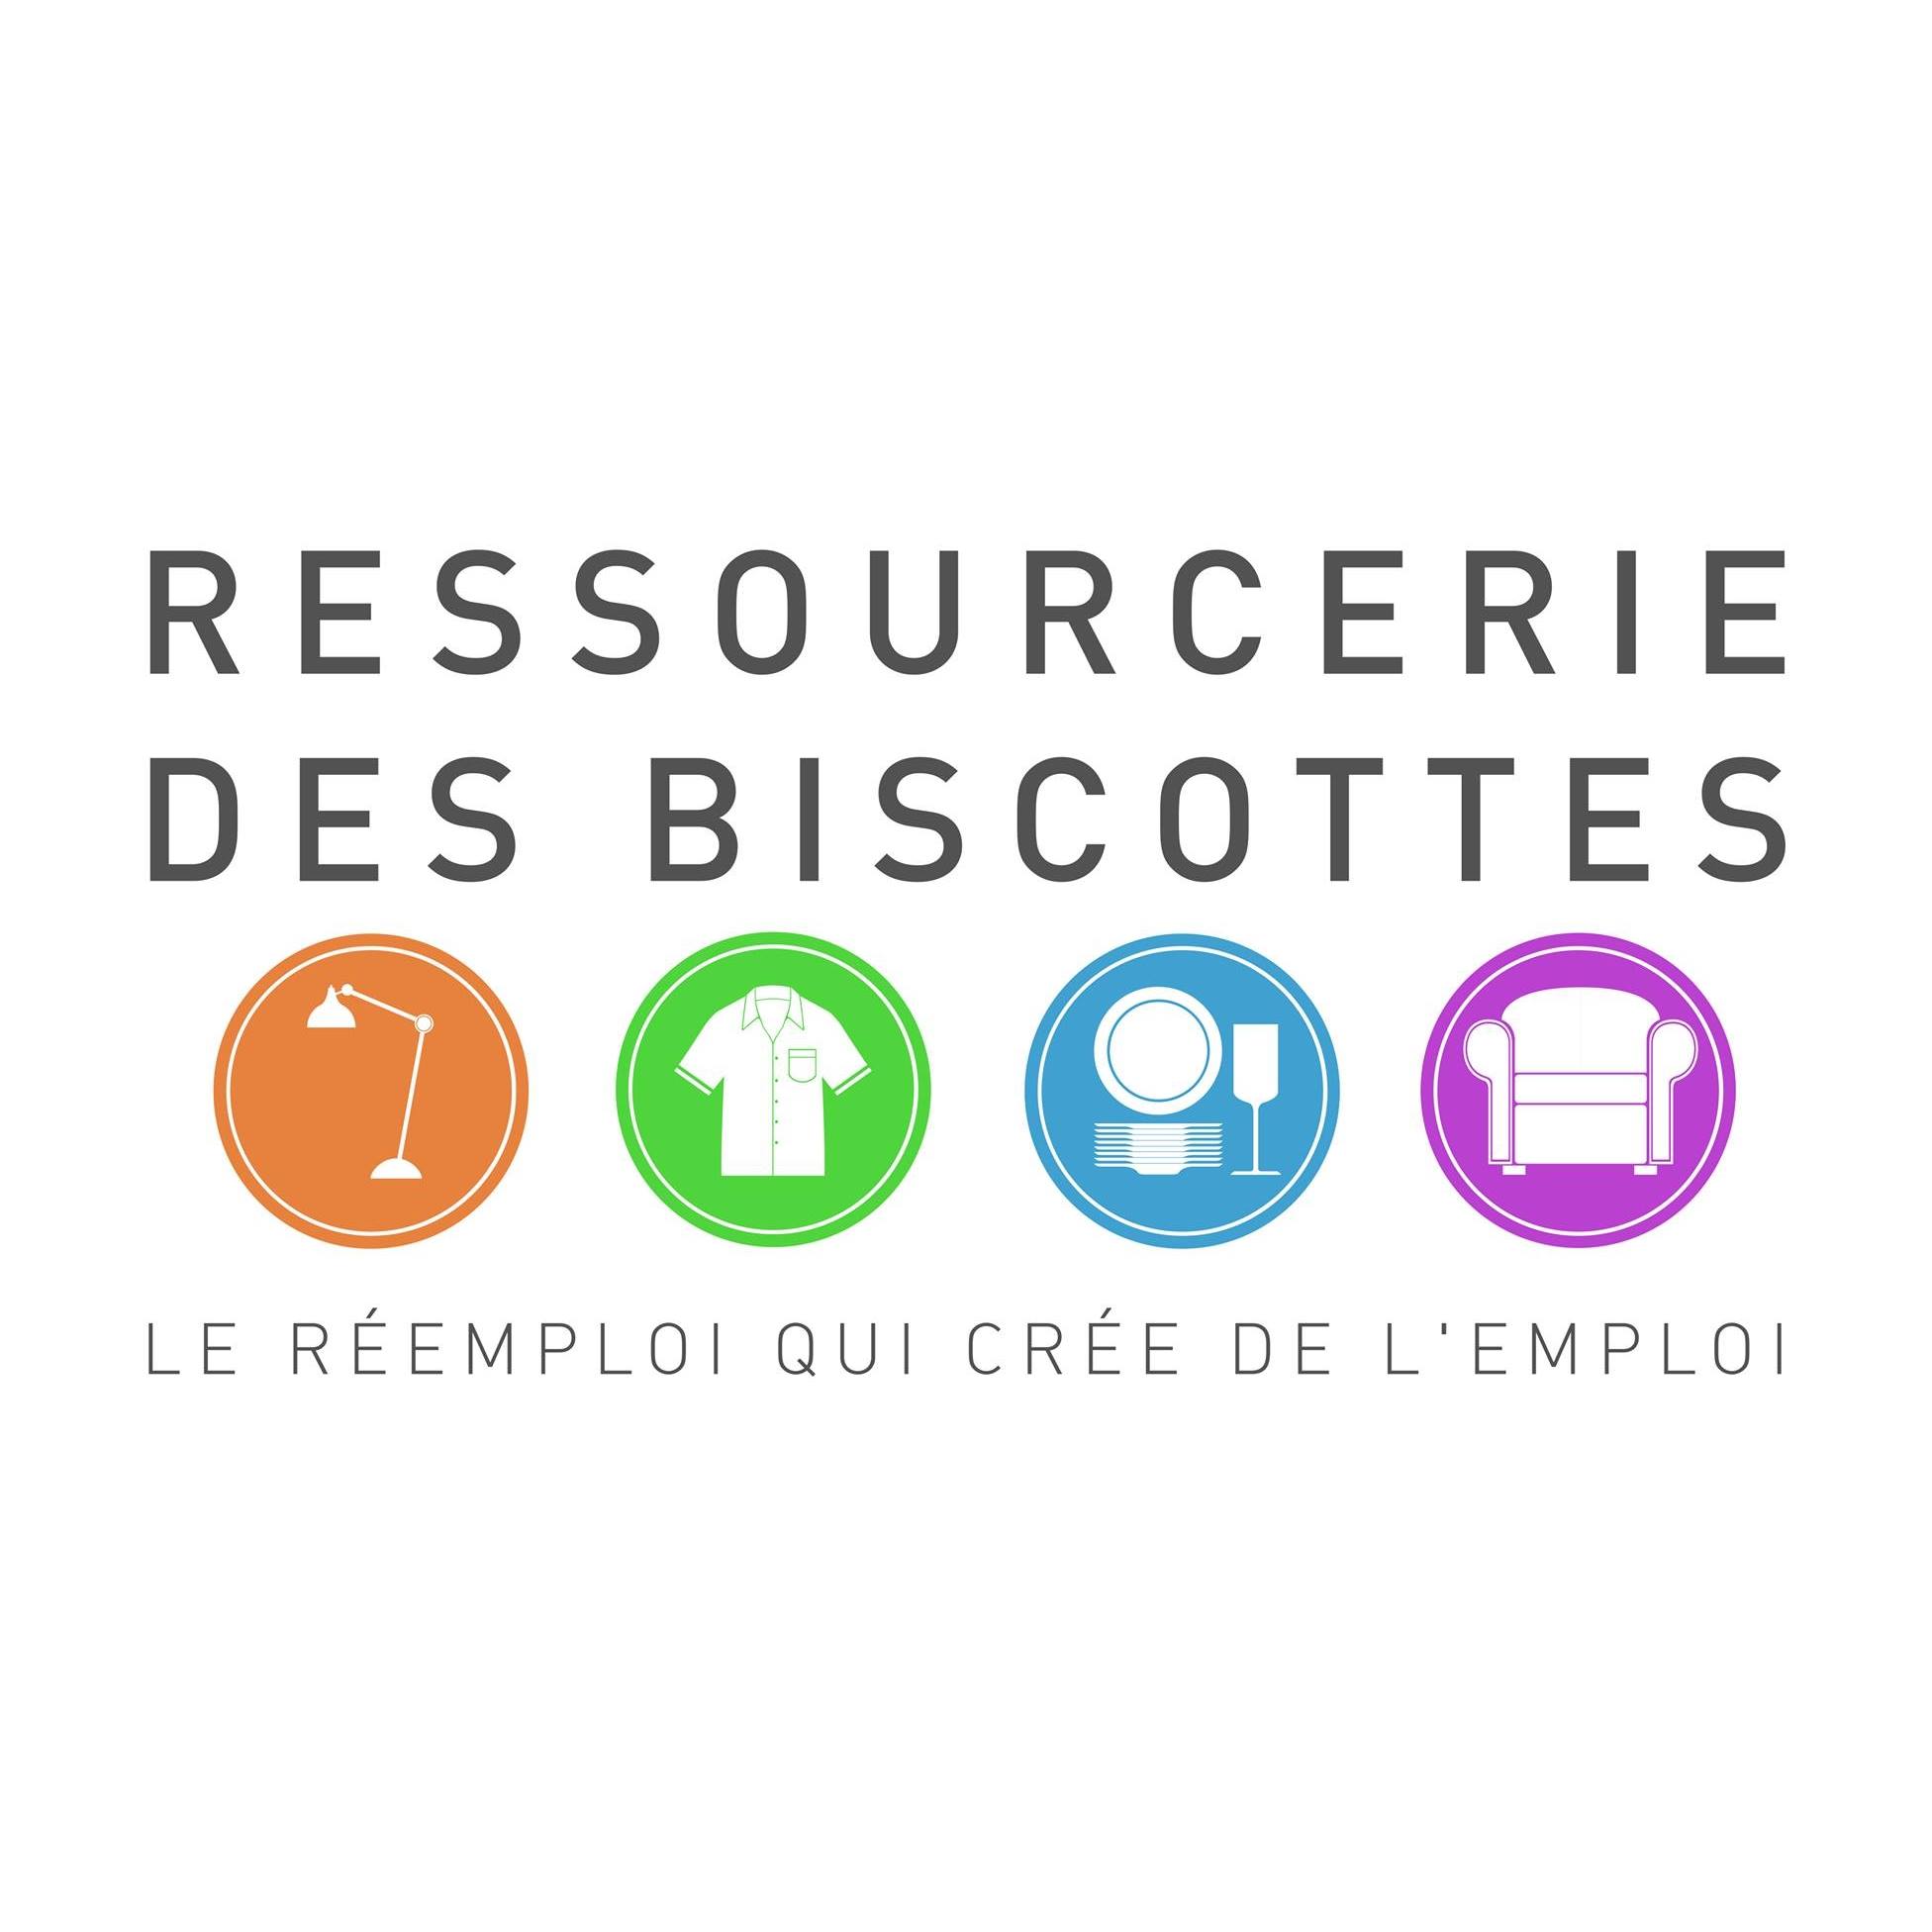 You are currently viewing Support La Ressourcerie des Biscottes